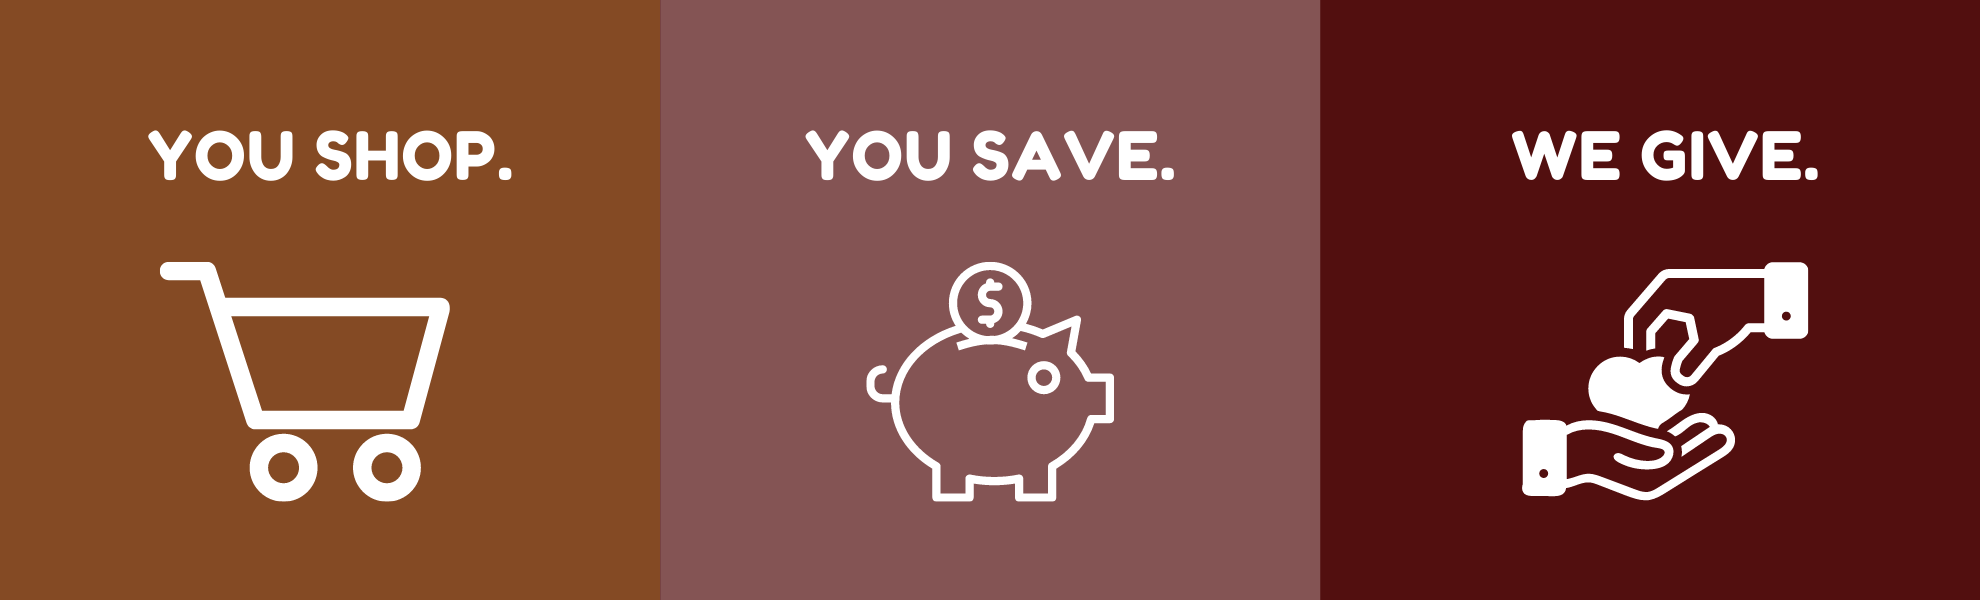 You Shop. You Save. We Give. | 800X